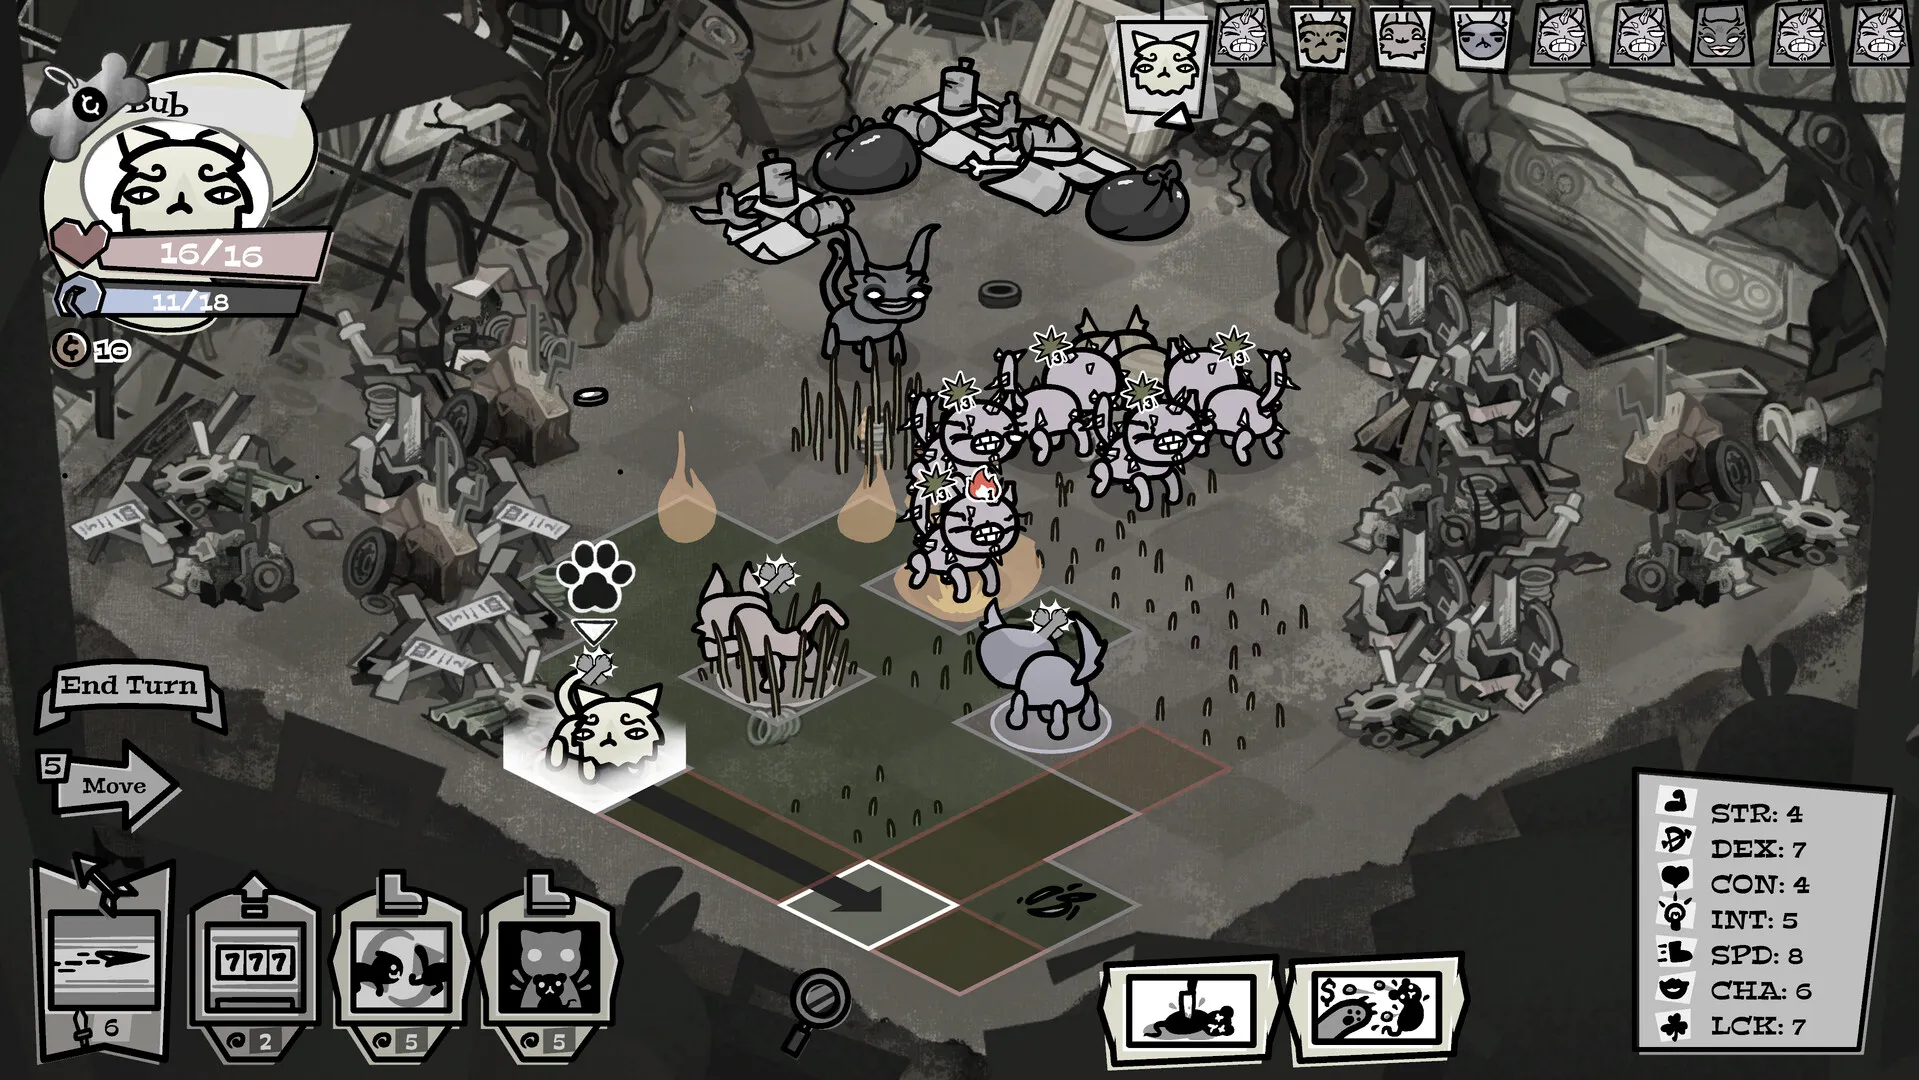 Mewgenics, the new game from the Binding of Isaac creator, has a release window